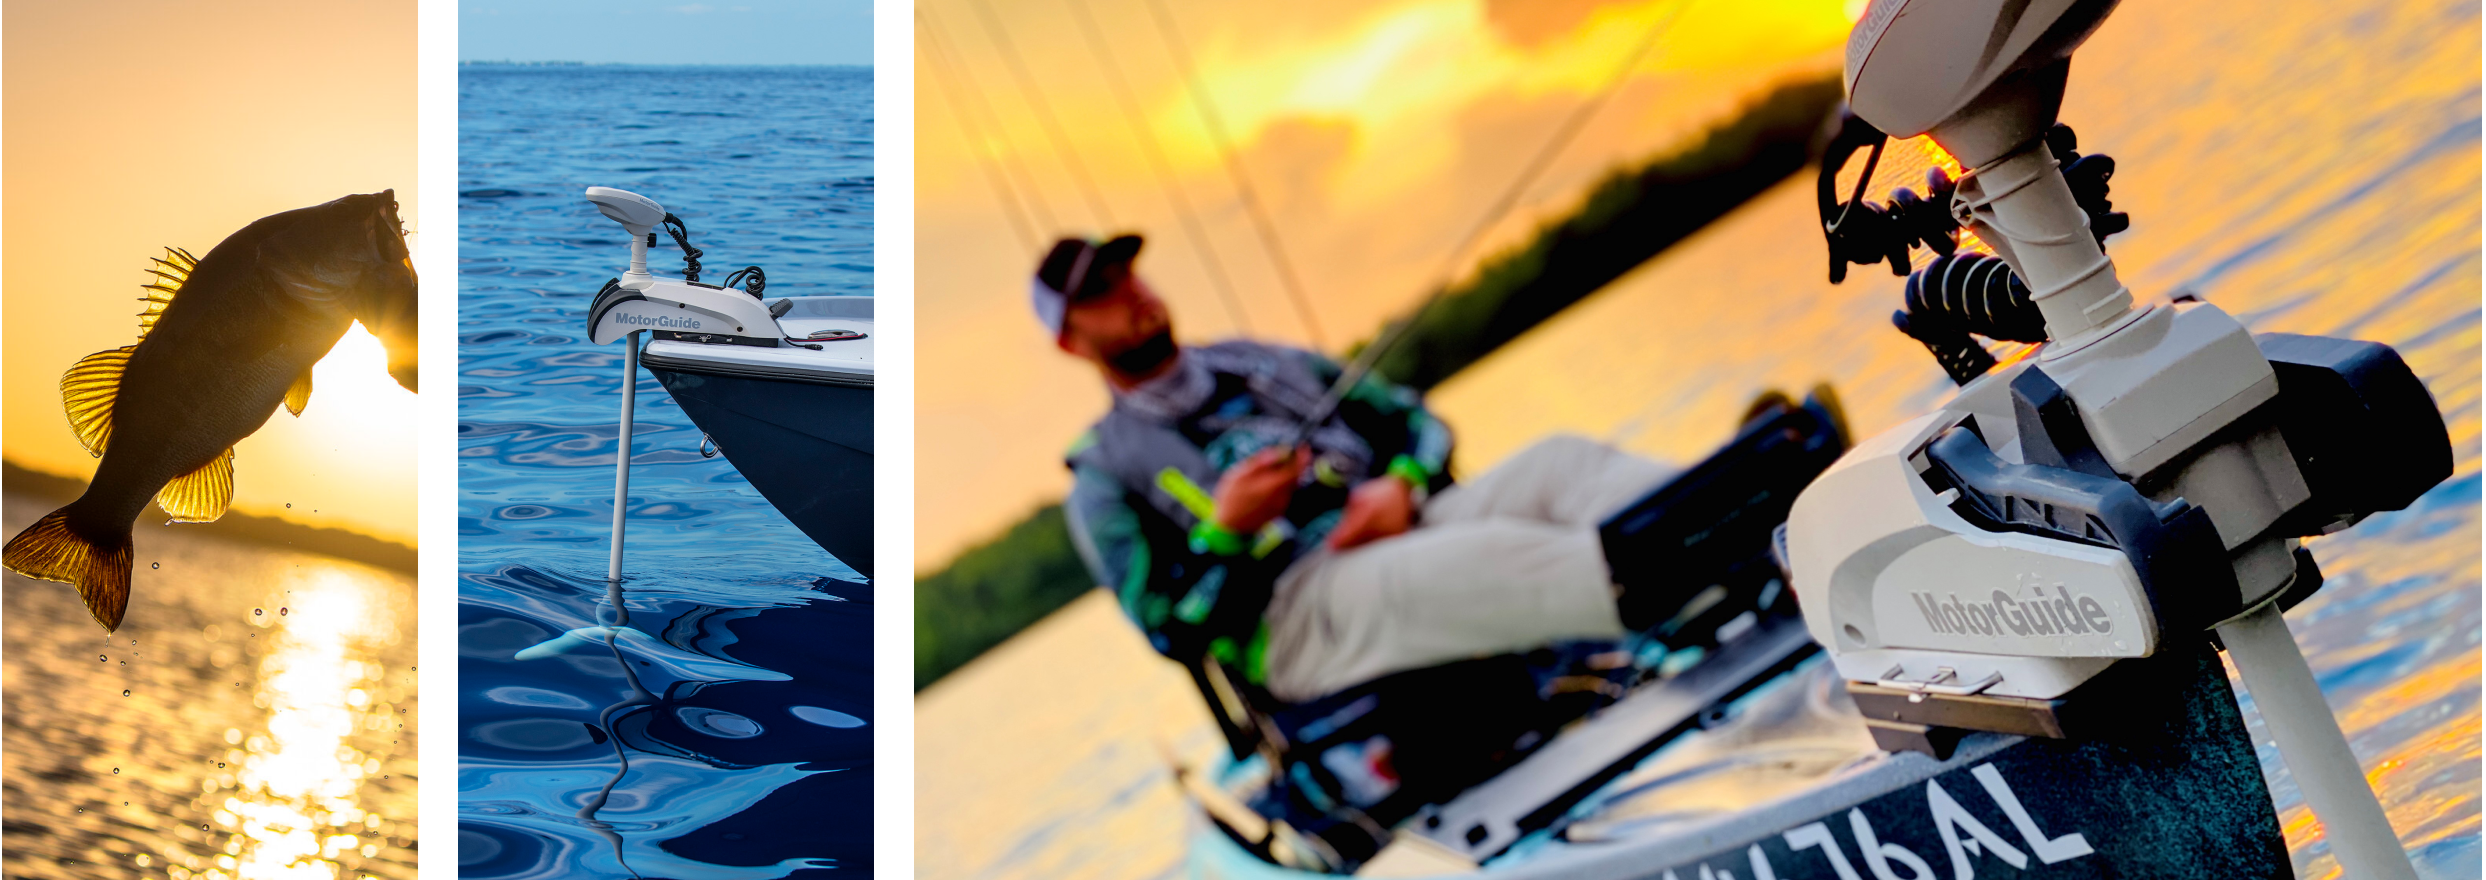 A fish jumping out of the water during the sunset.A MotorGuide trolling motor. A person sitting on a fishing boat with a MotorGuide trolling motor. 